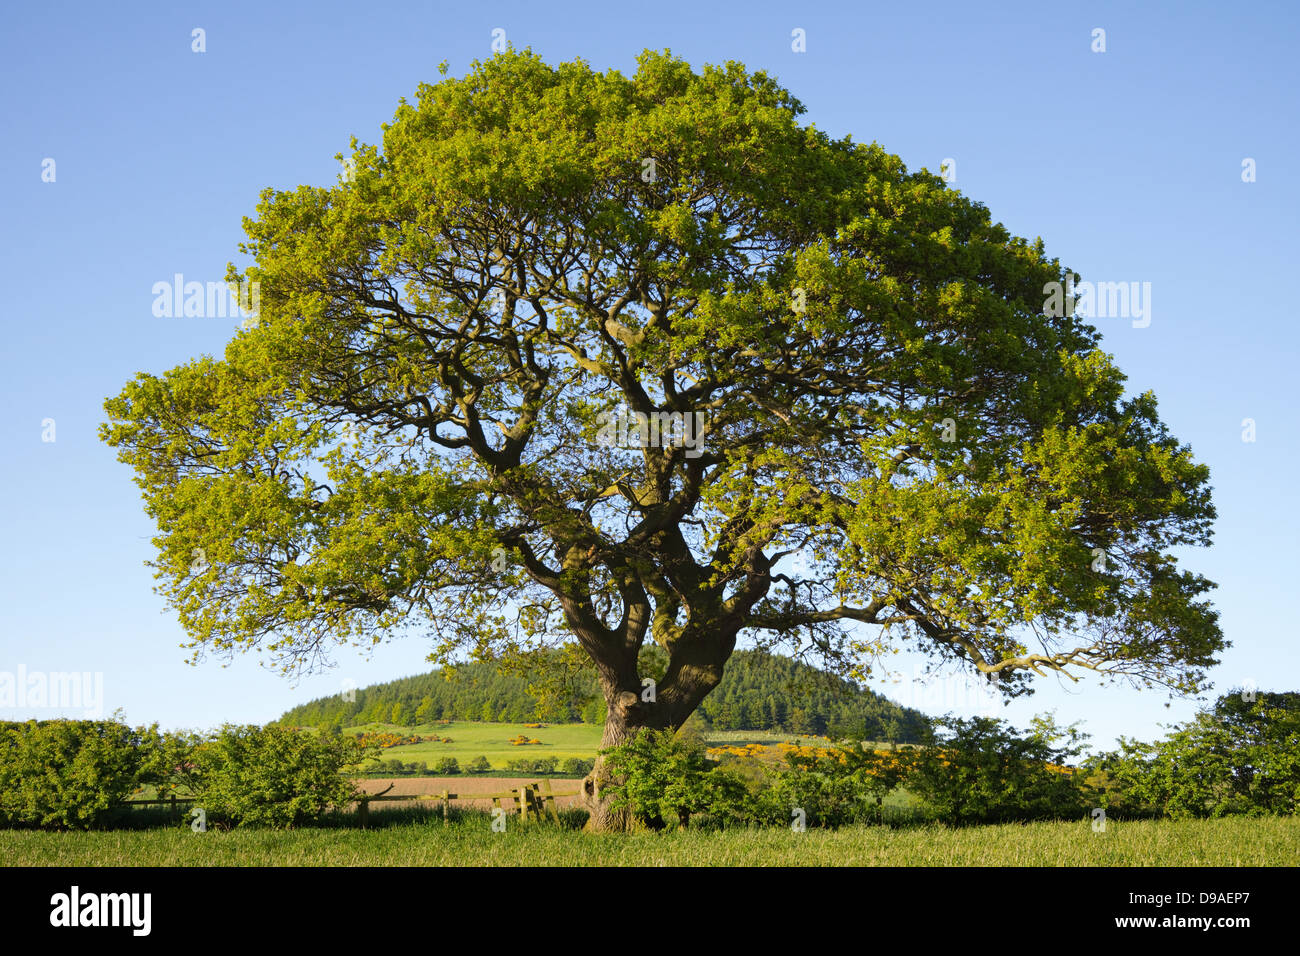 Oak Tree With Distant Hill Clear Blue Sky In An English Landscape Stock Photo Alamy